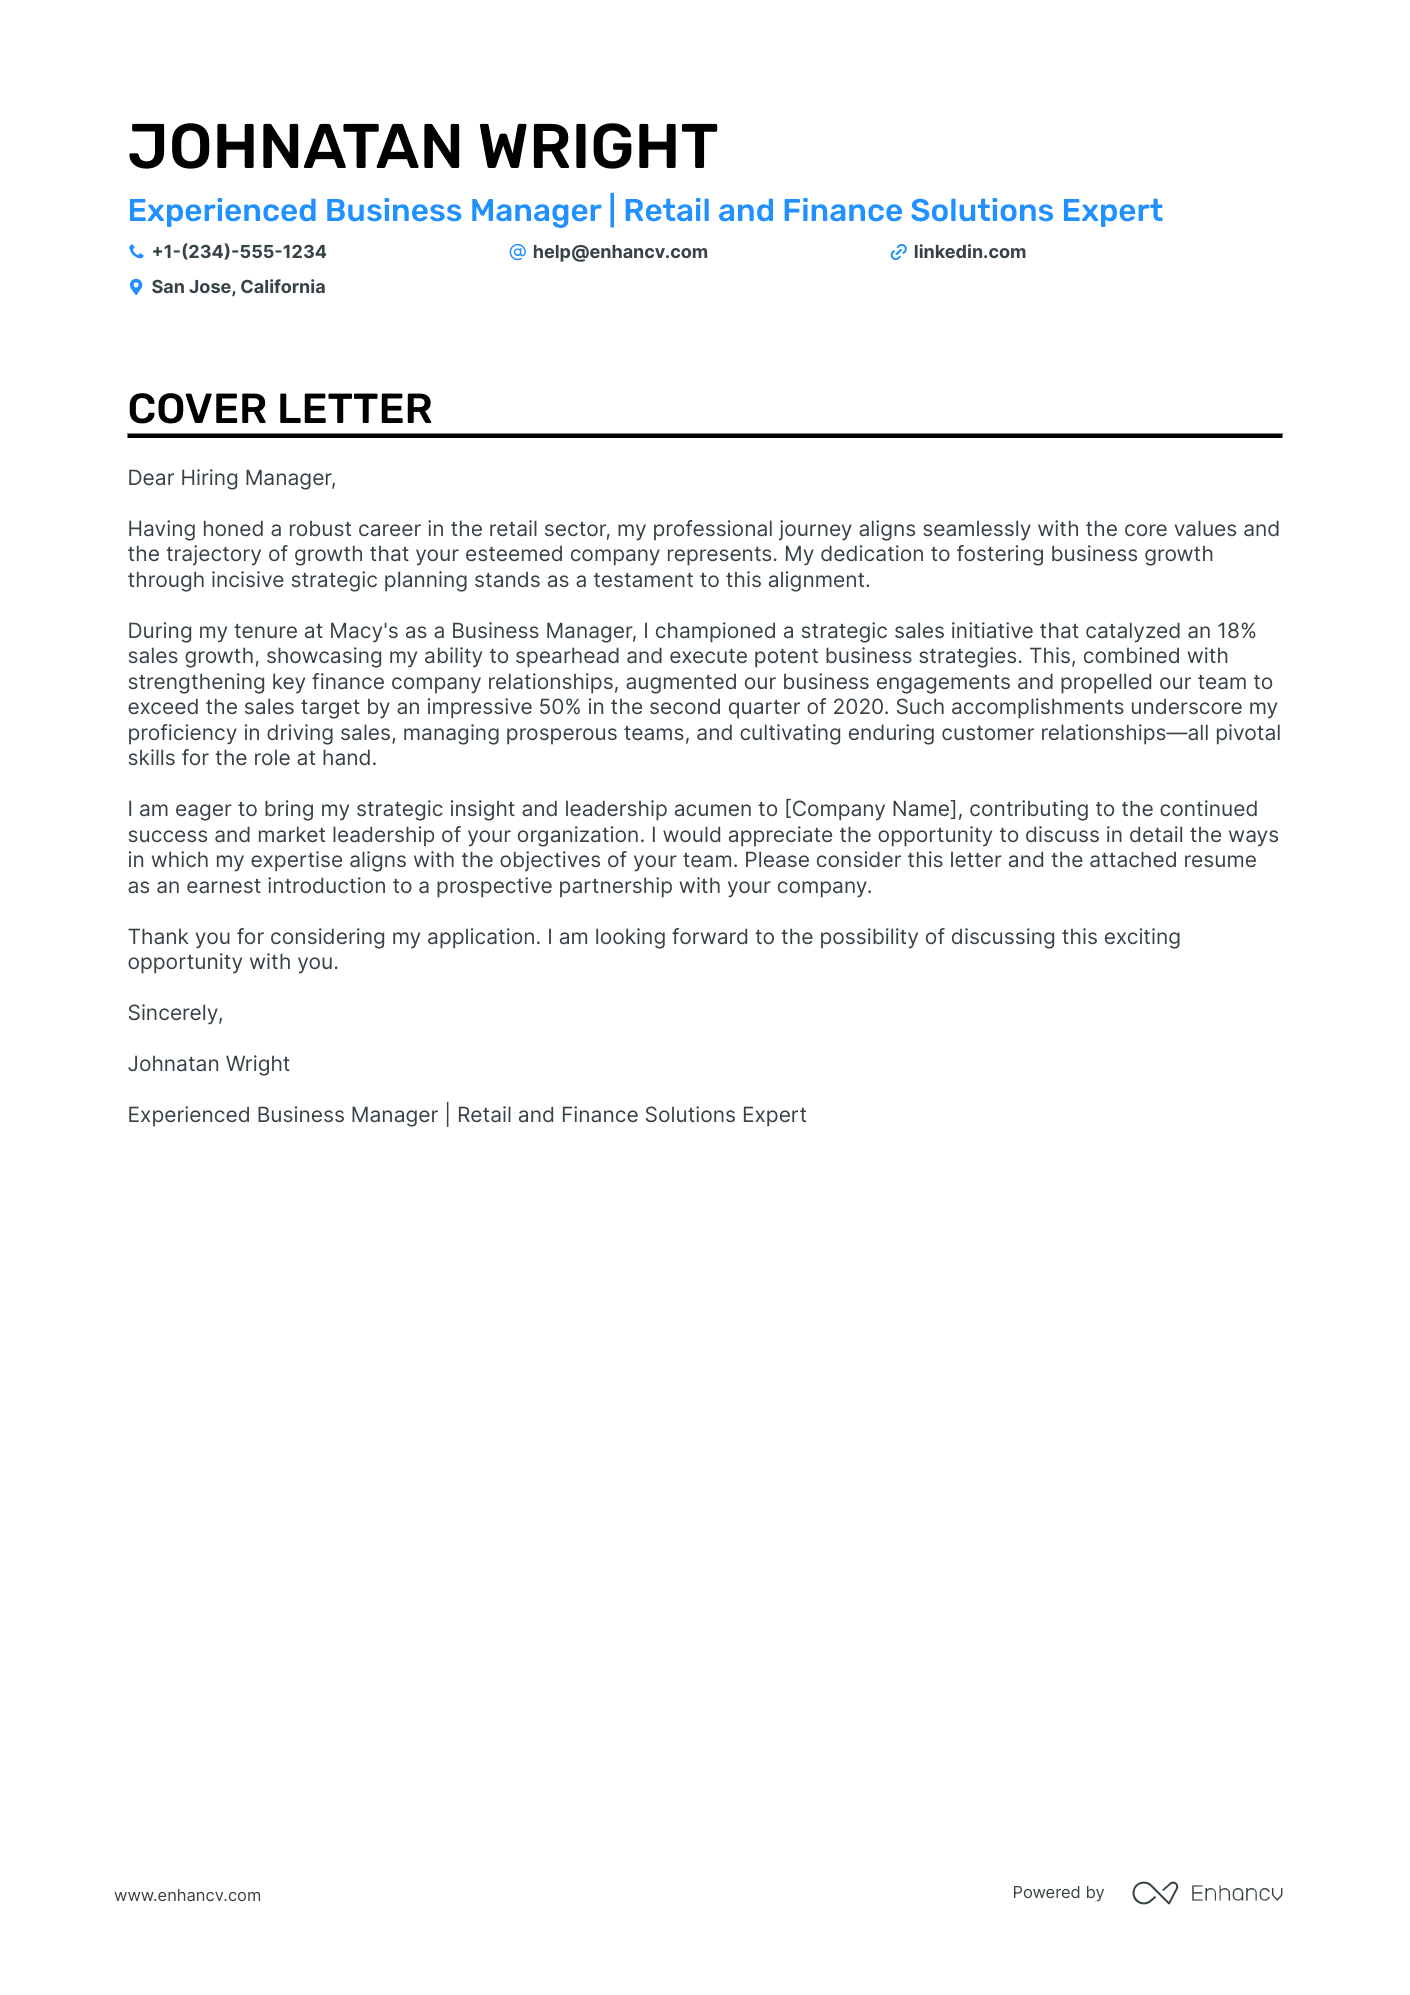 Business Manager cover letter